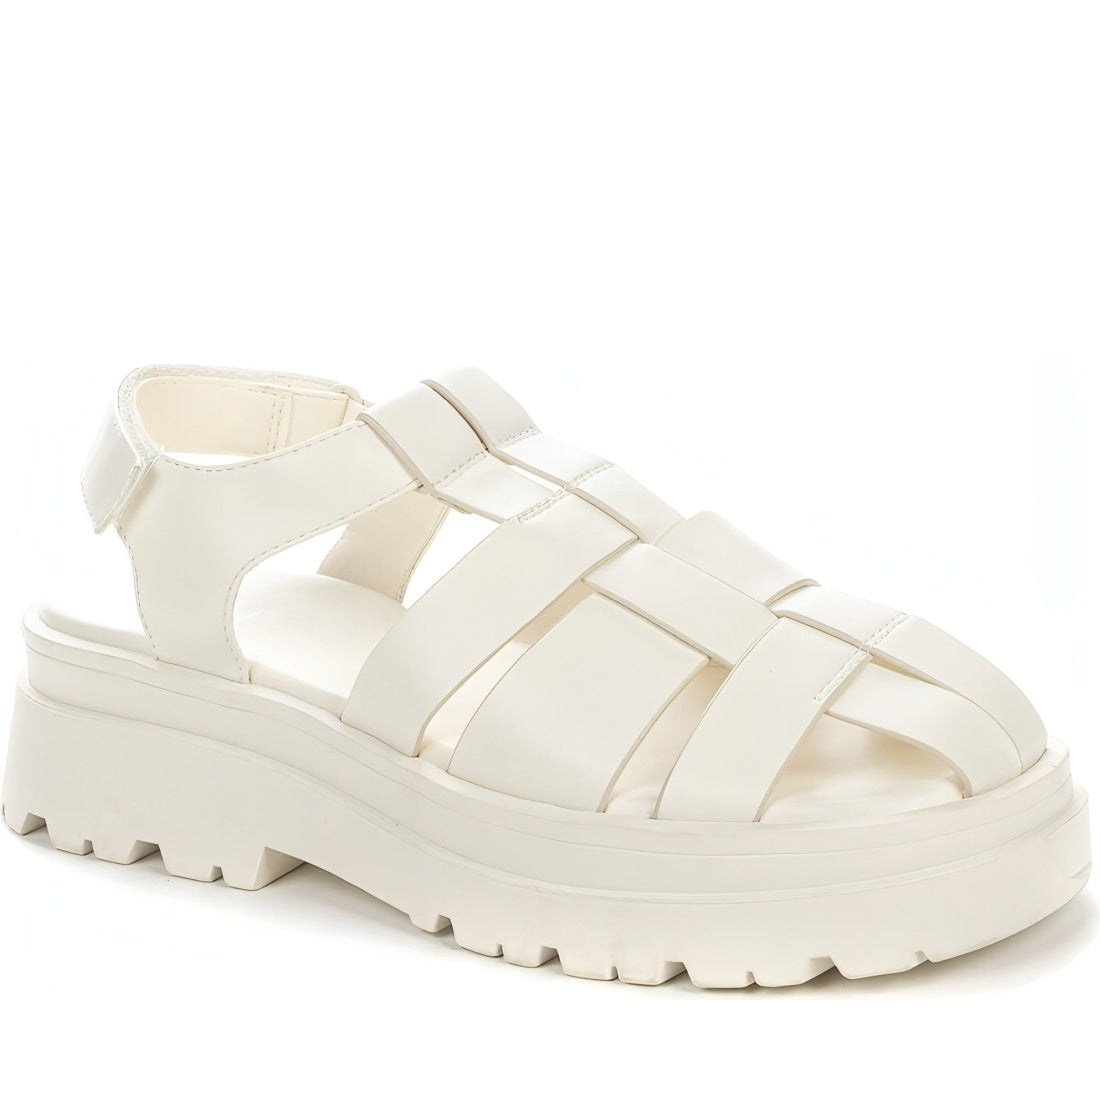 BETSY womens white casual open sandals | Vilbury London